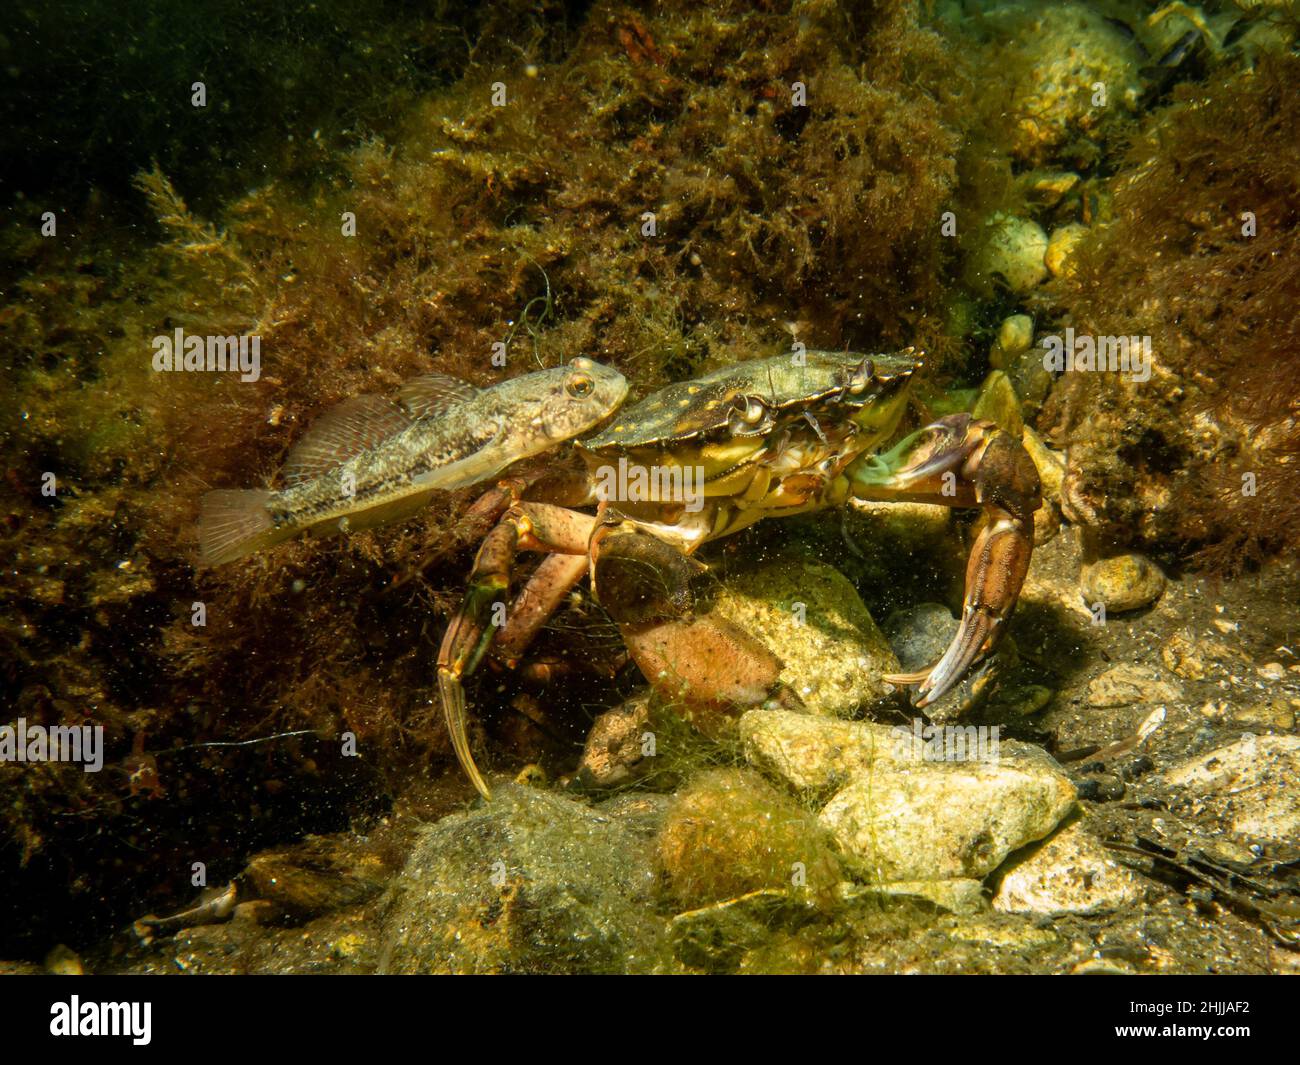 A crab and a Sandy Goby, Pomatoschistus minutus, in The Sound, the water between Sweden and Denmark Stock Photo